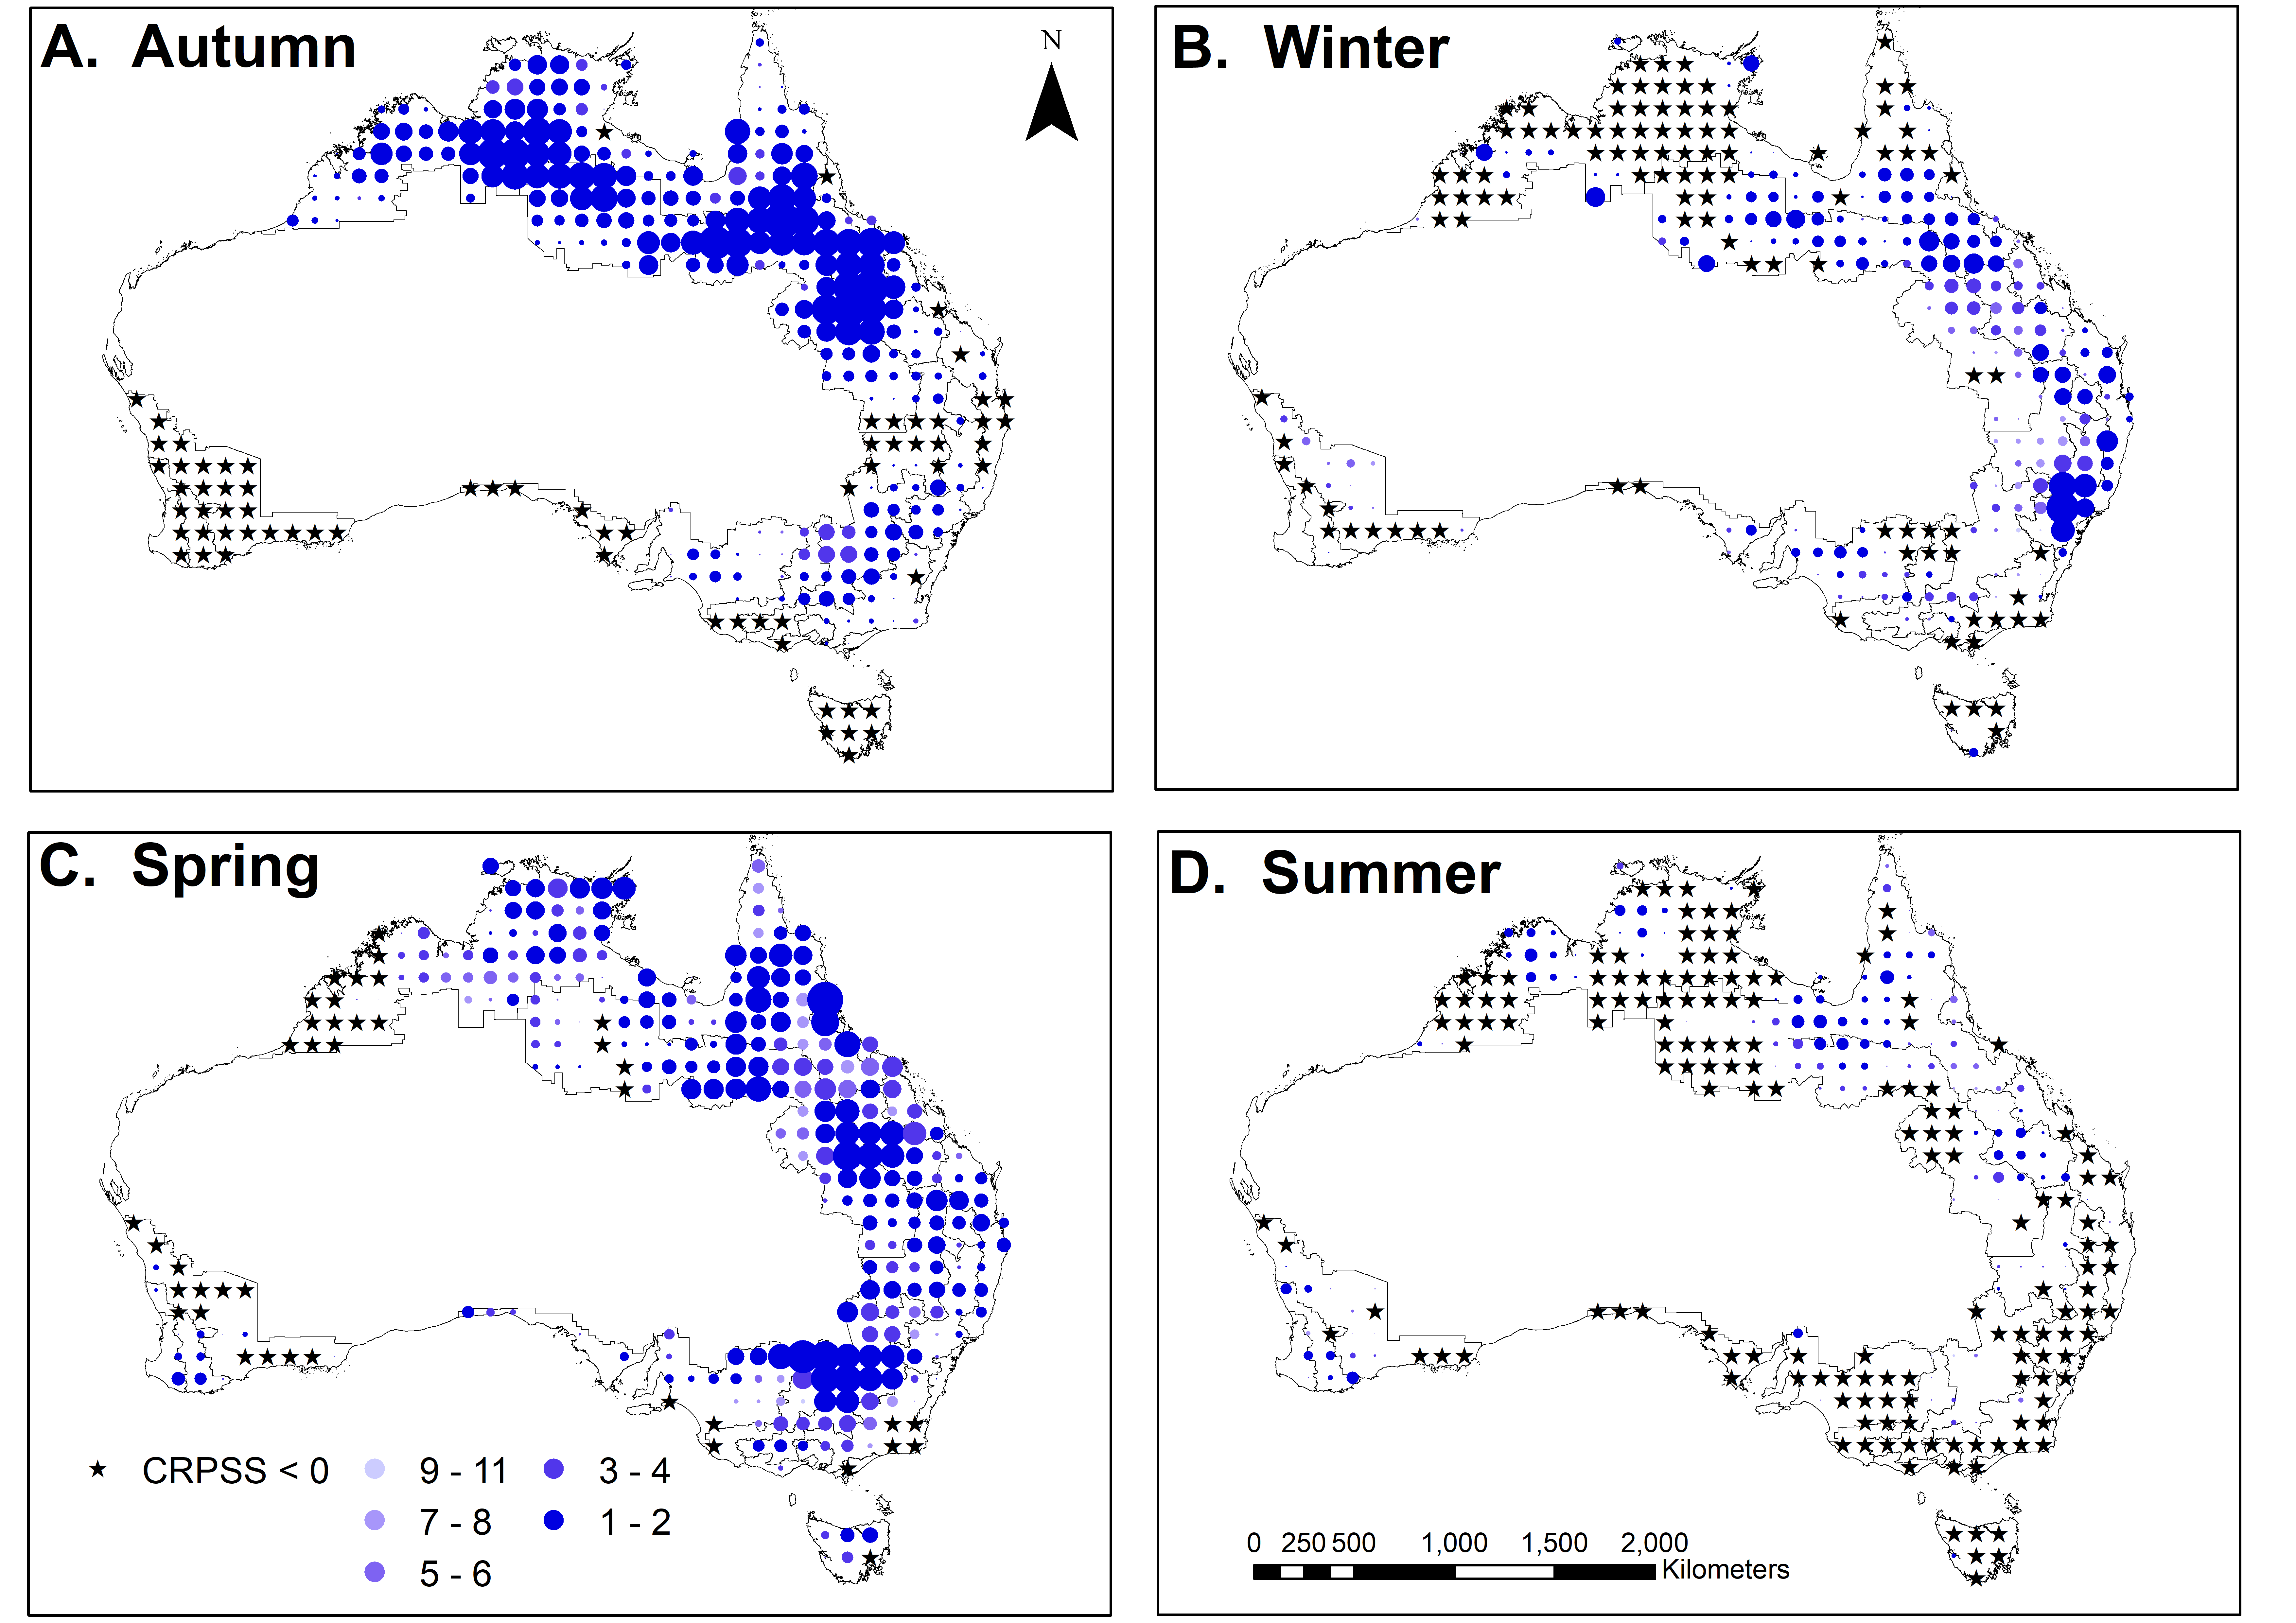 Four Pictures of a map of Australia showing rainfall in autumn, winter, spring and summer